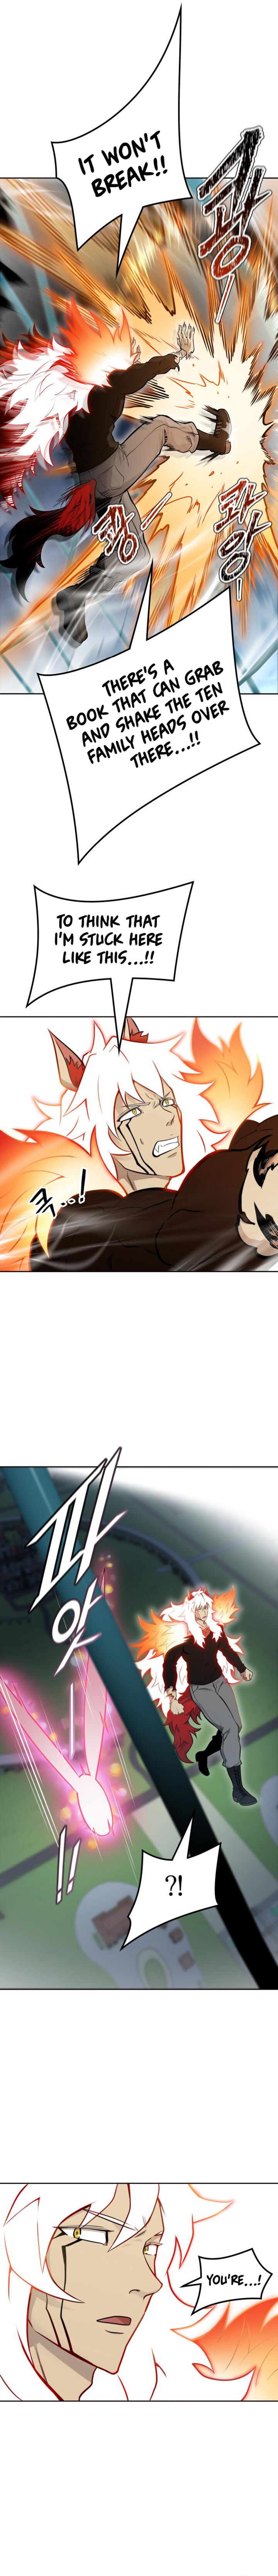 Tower Of God 587 15